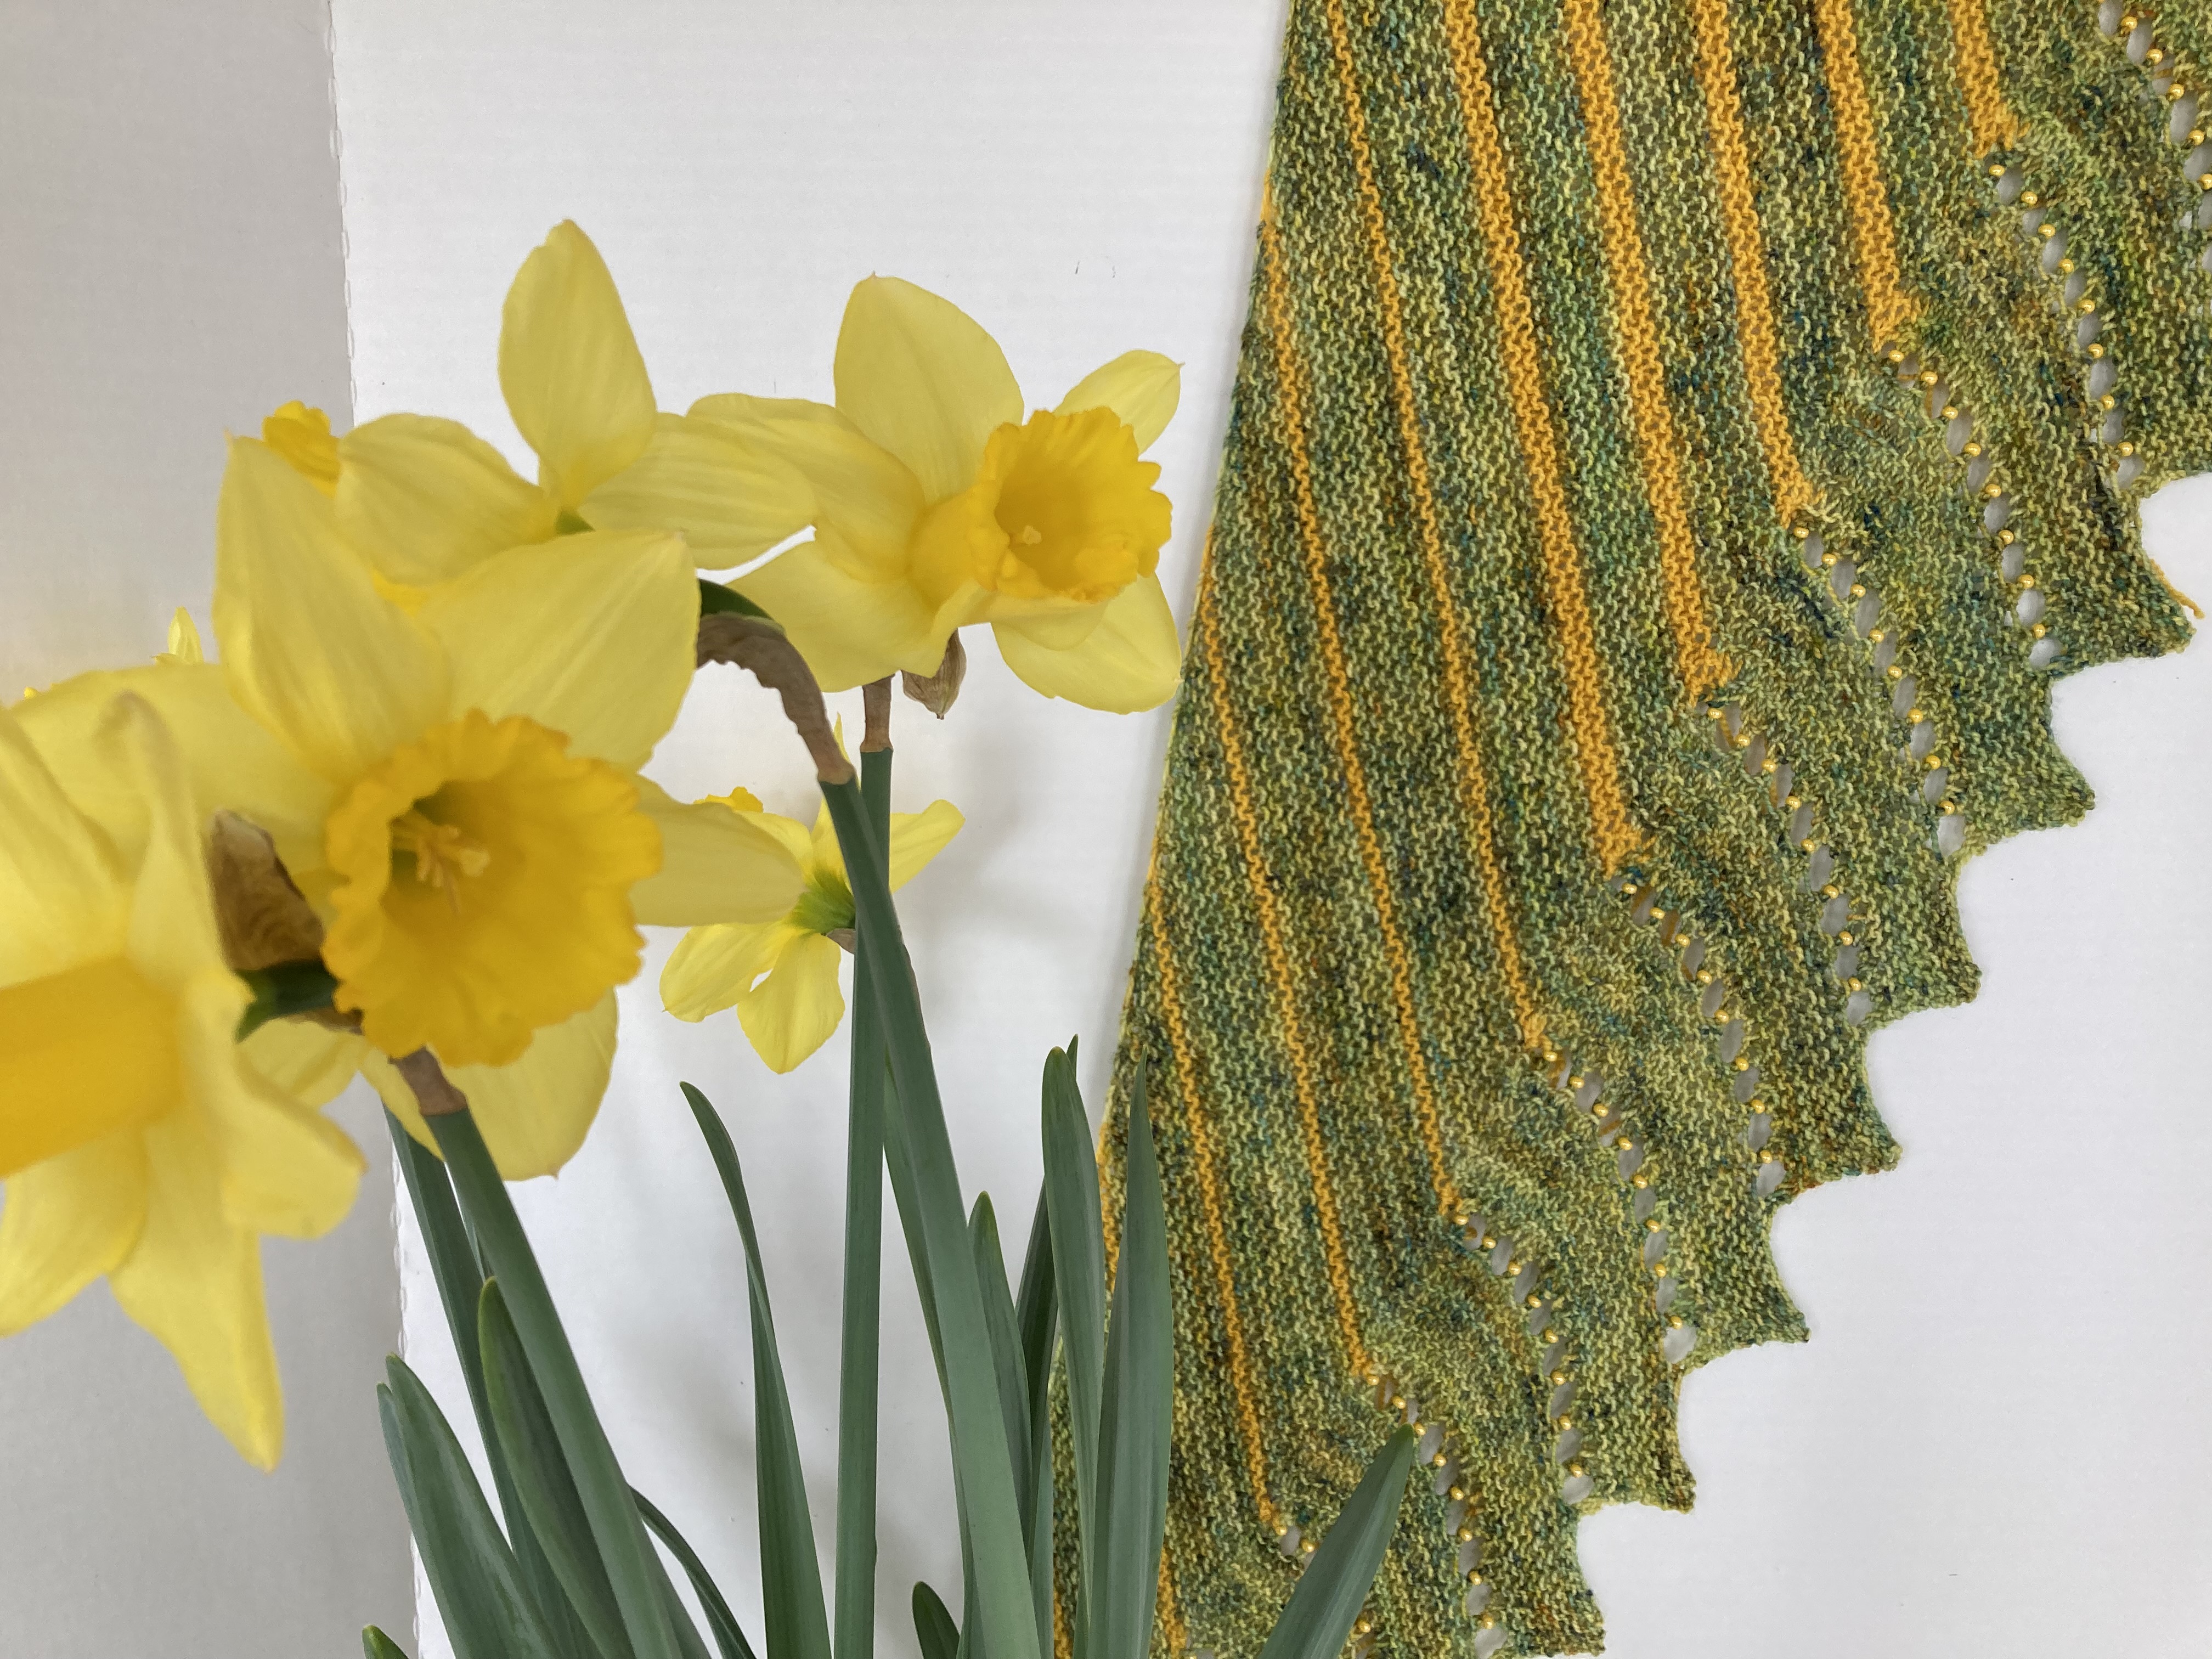 Green and yellow hand knit shawl with daffodils